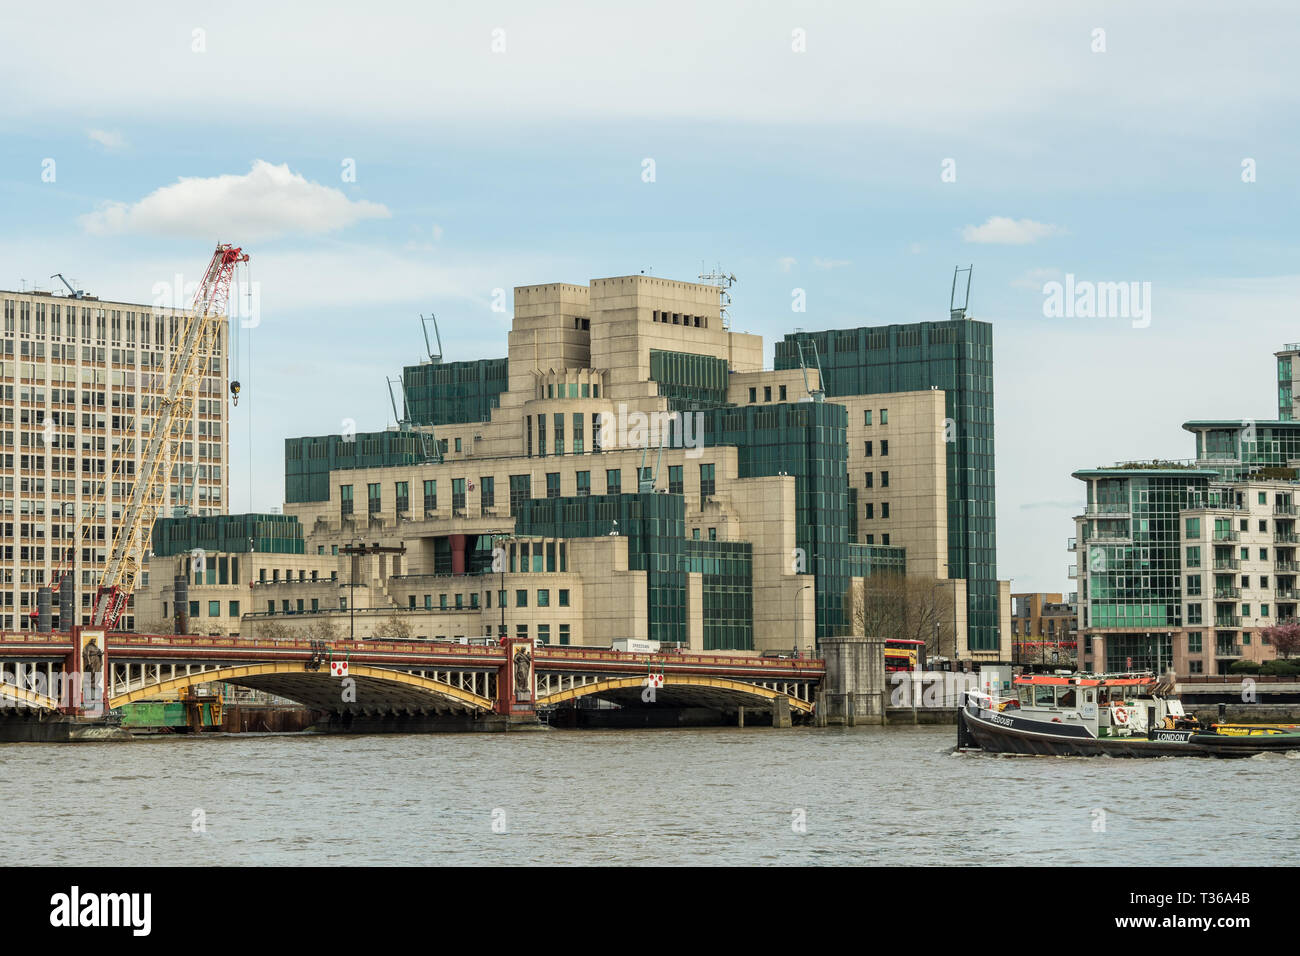 Vauxhall bridge with the SIS or MI6 building, the headquarters of the Secret Intelligence service in the UK. London. Stock Photo